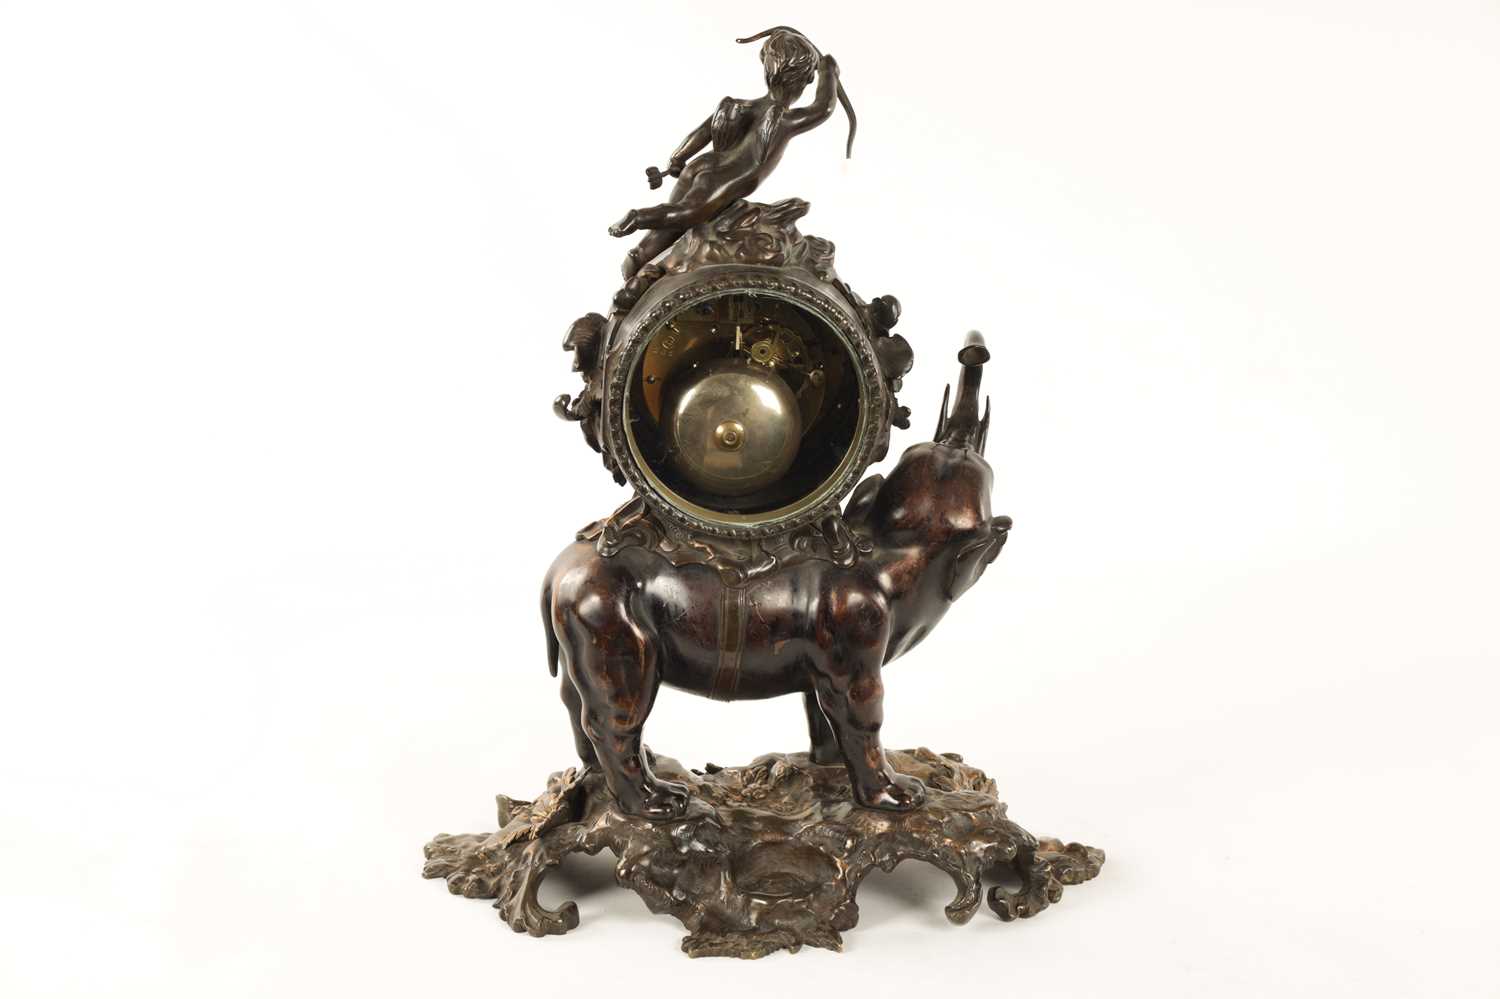 THUILLIER, A PARIS. A LATE 19TH CENTURY FRENCH PATINATED BRONZE MANTEL CLOCK - Image 10 of 14